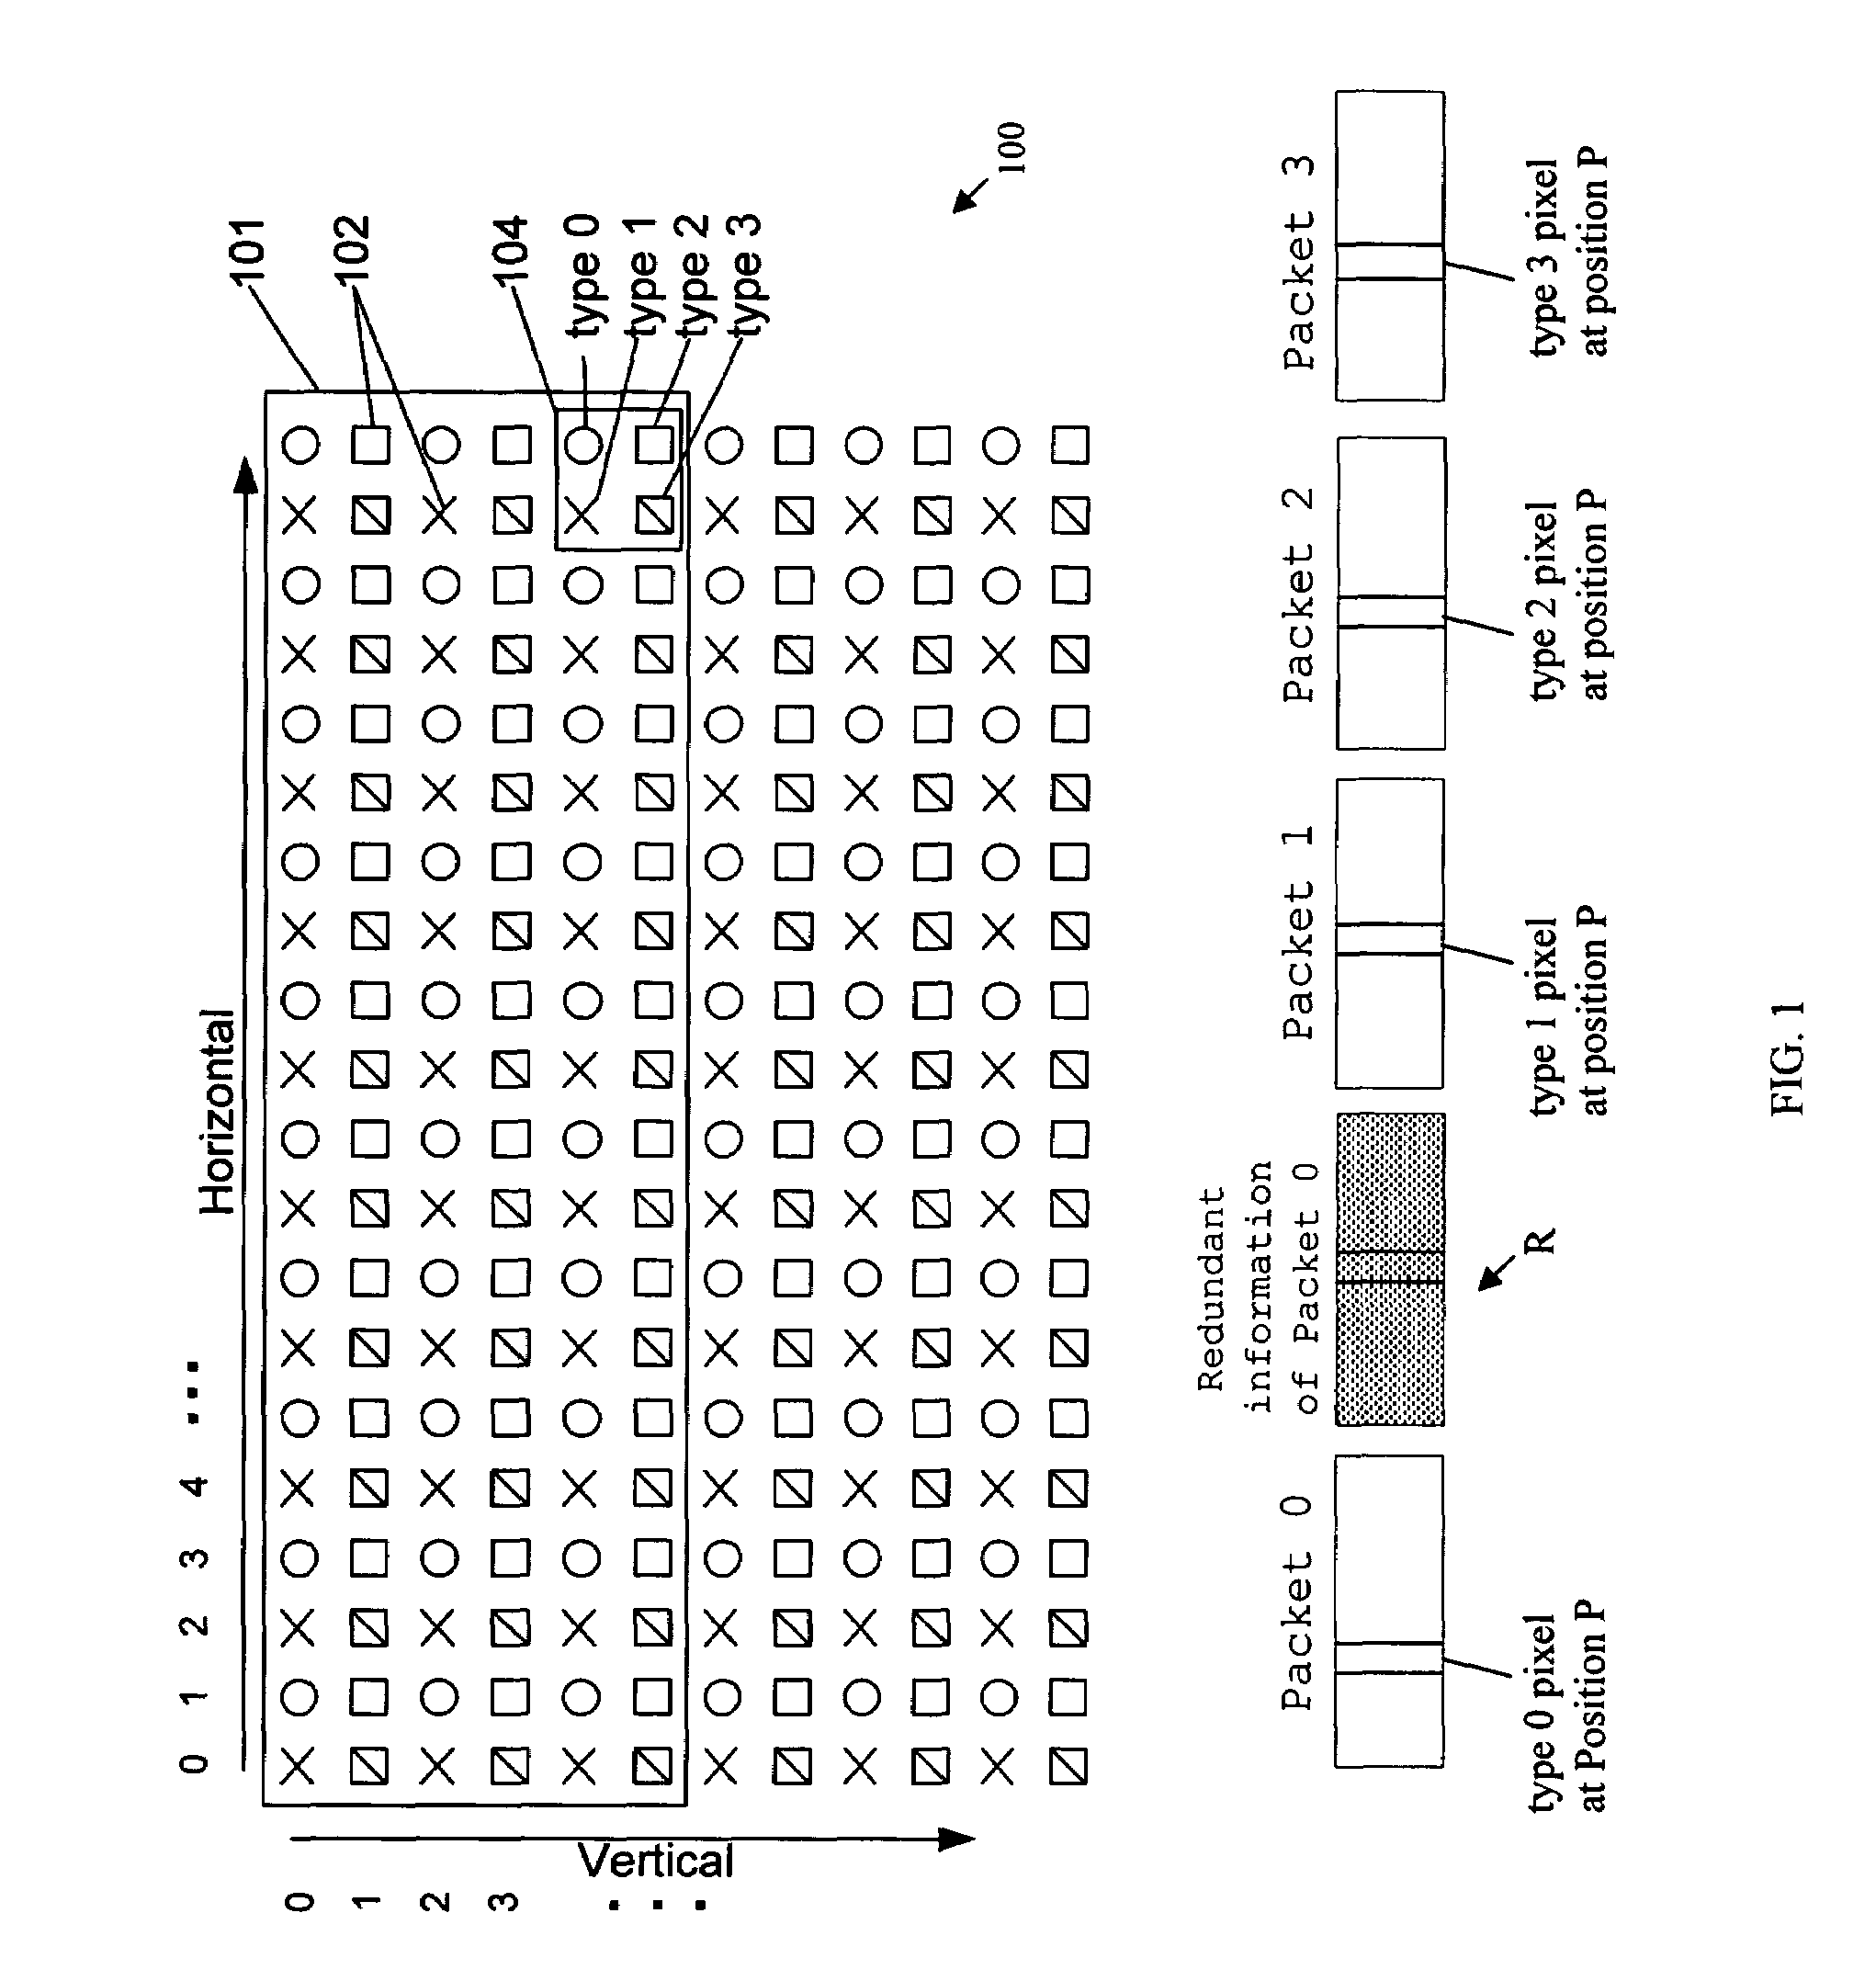 Method and system for appending redundancy to uncompressed video for transmission over wireless communication channels